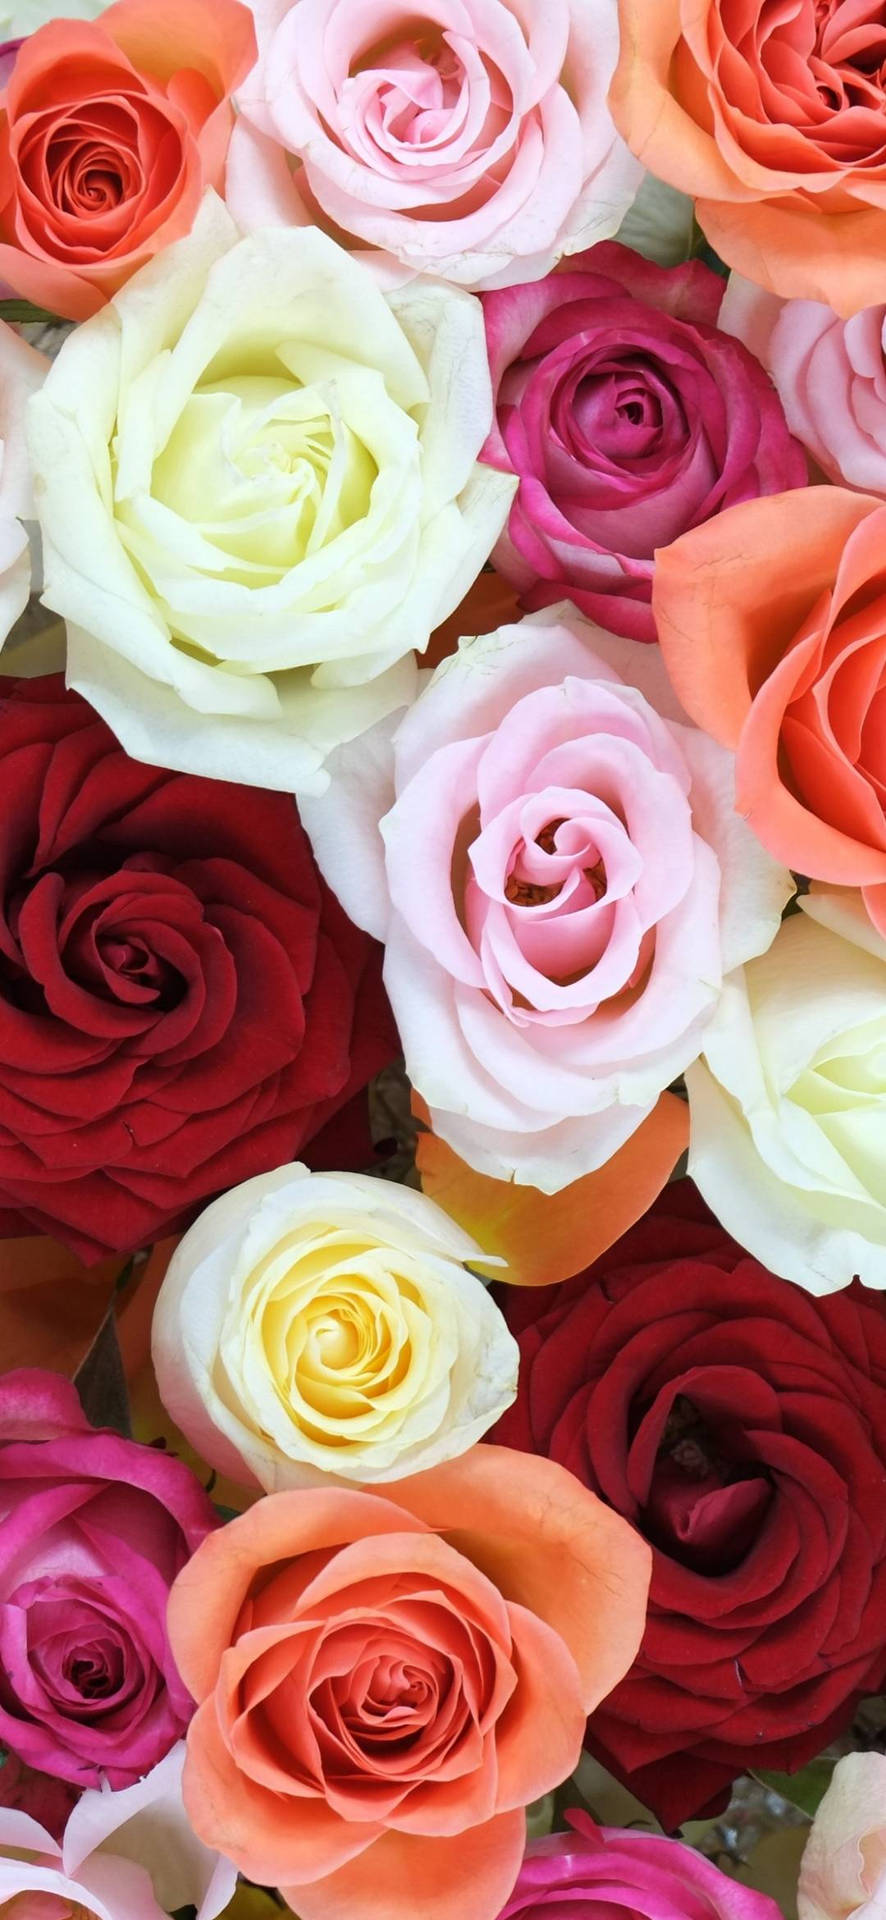 Roses In Different Colors Flower Phone Background